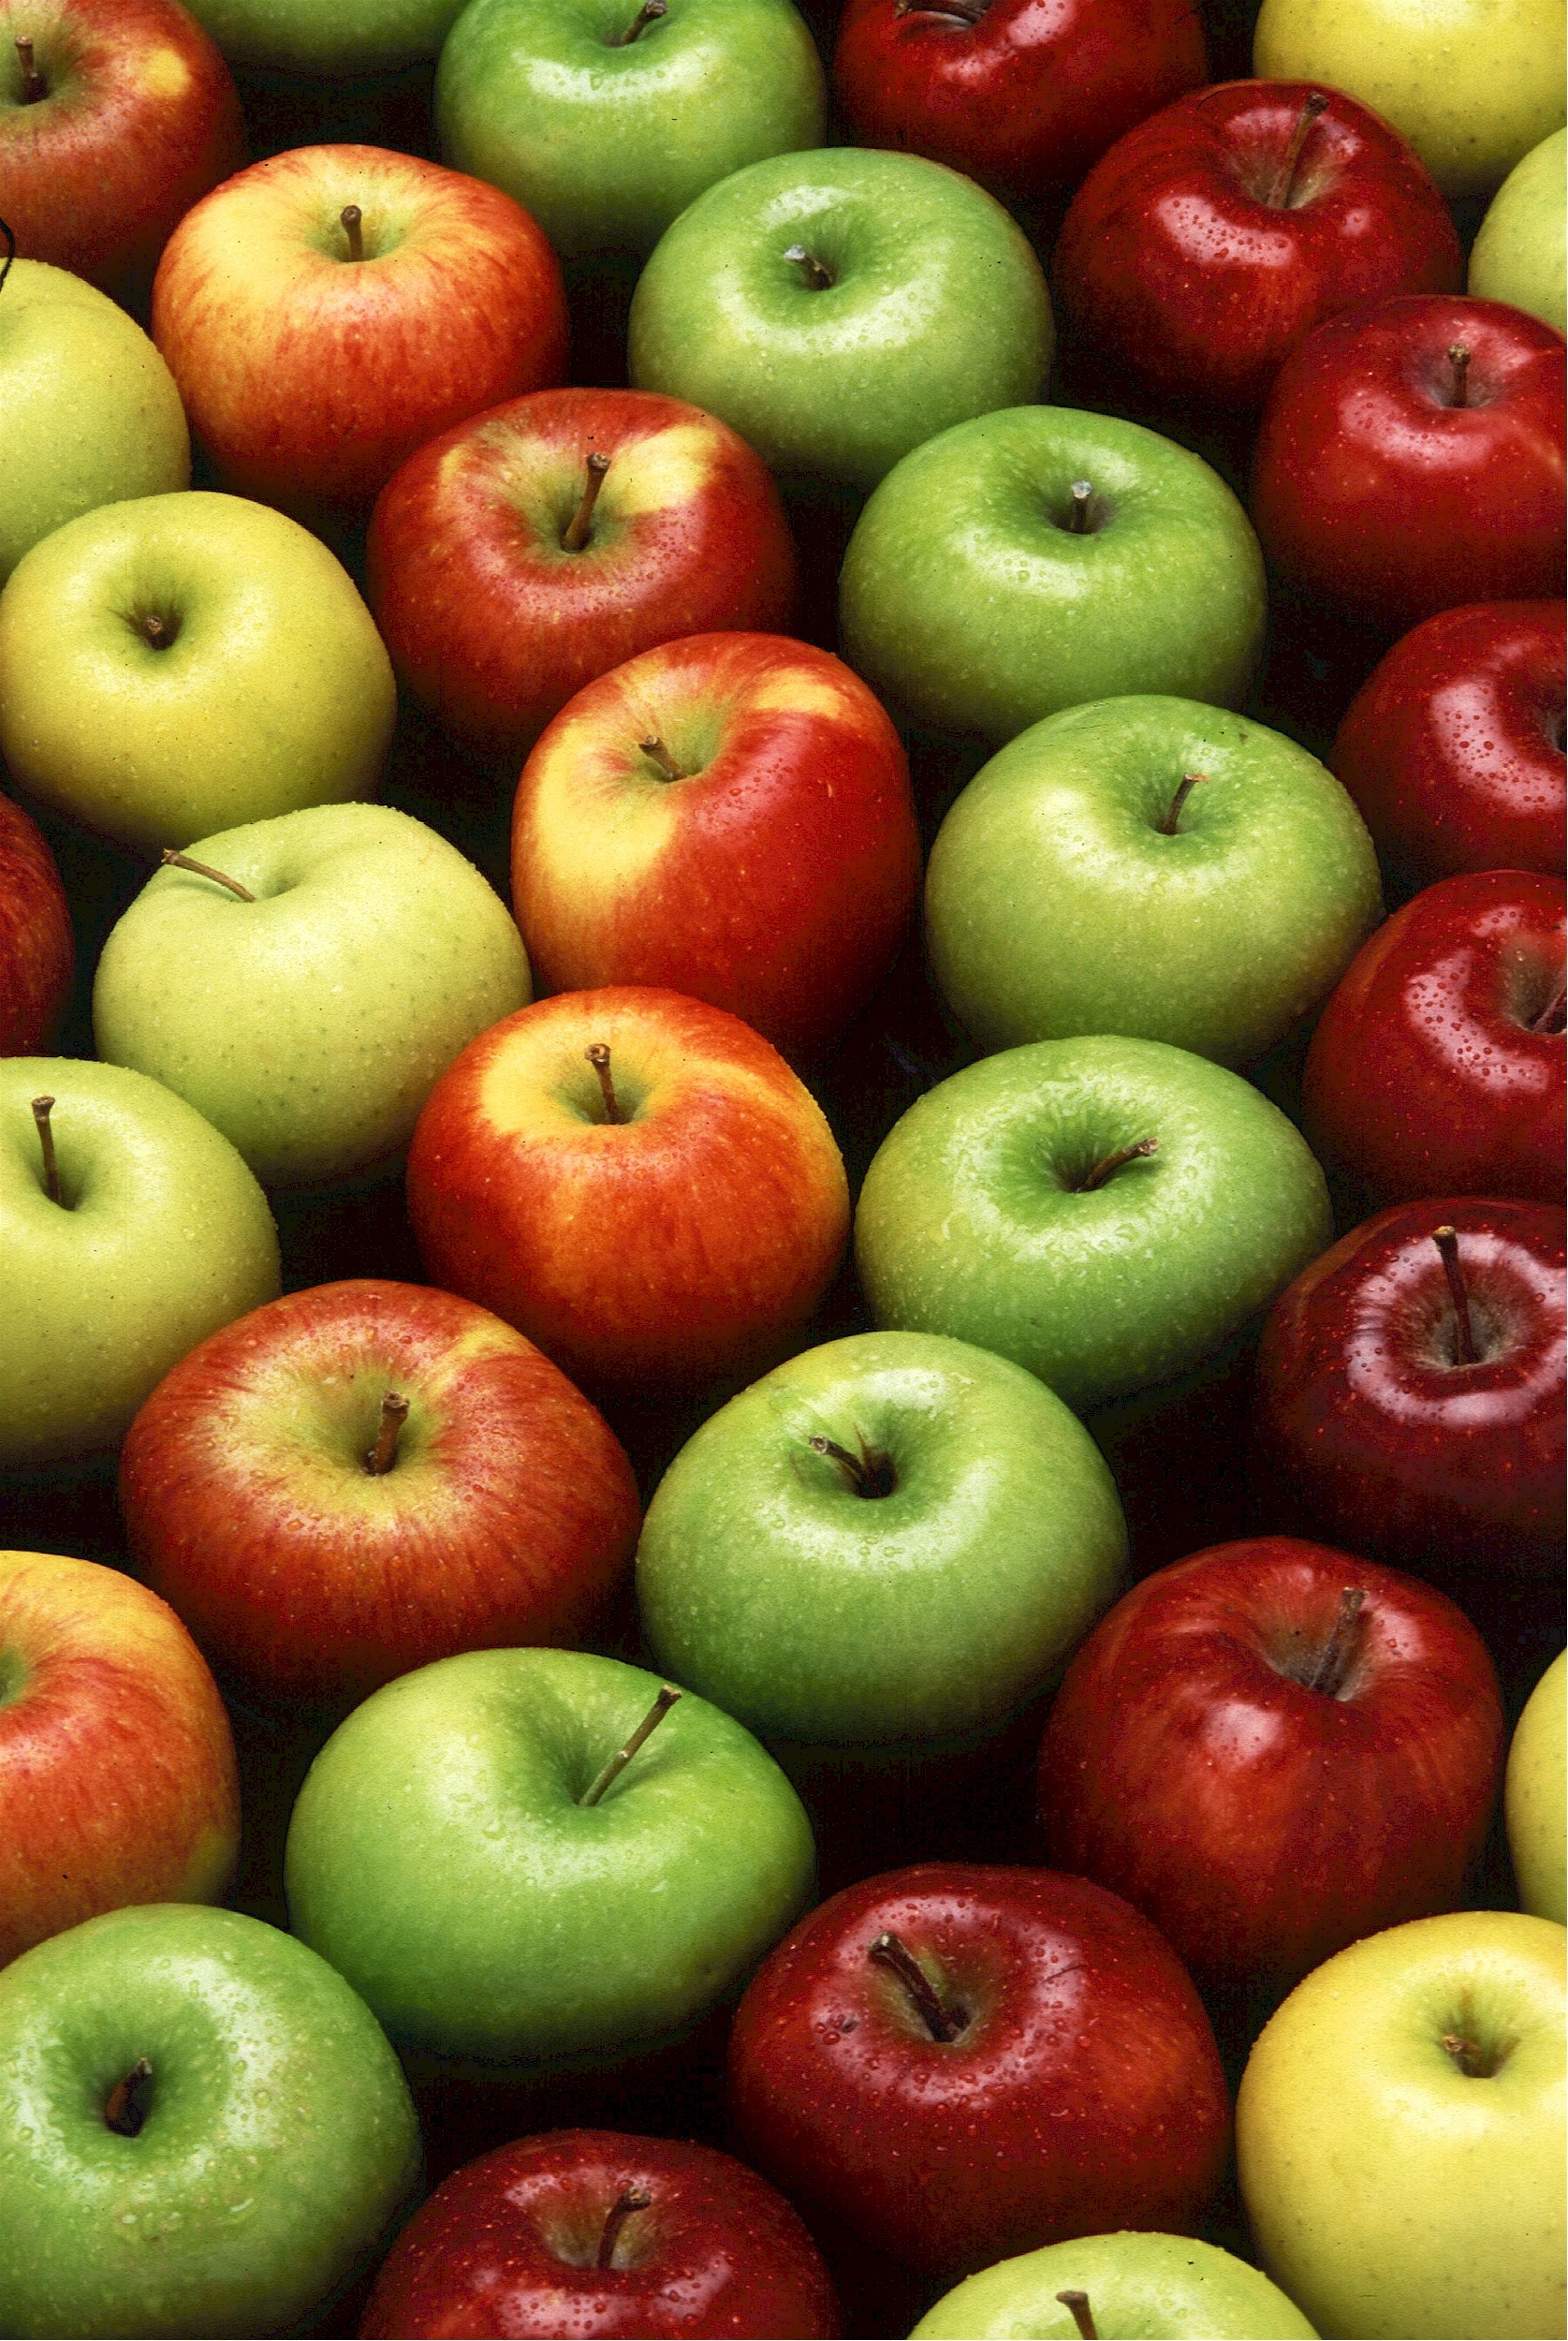 Colorful apples photo